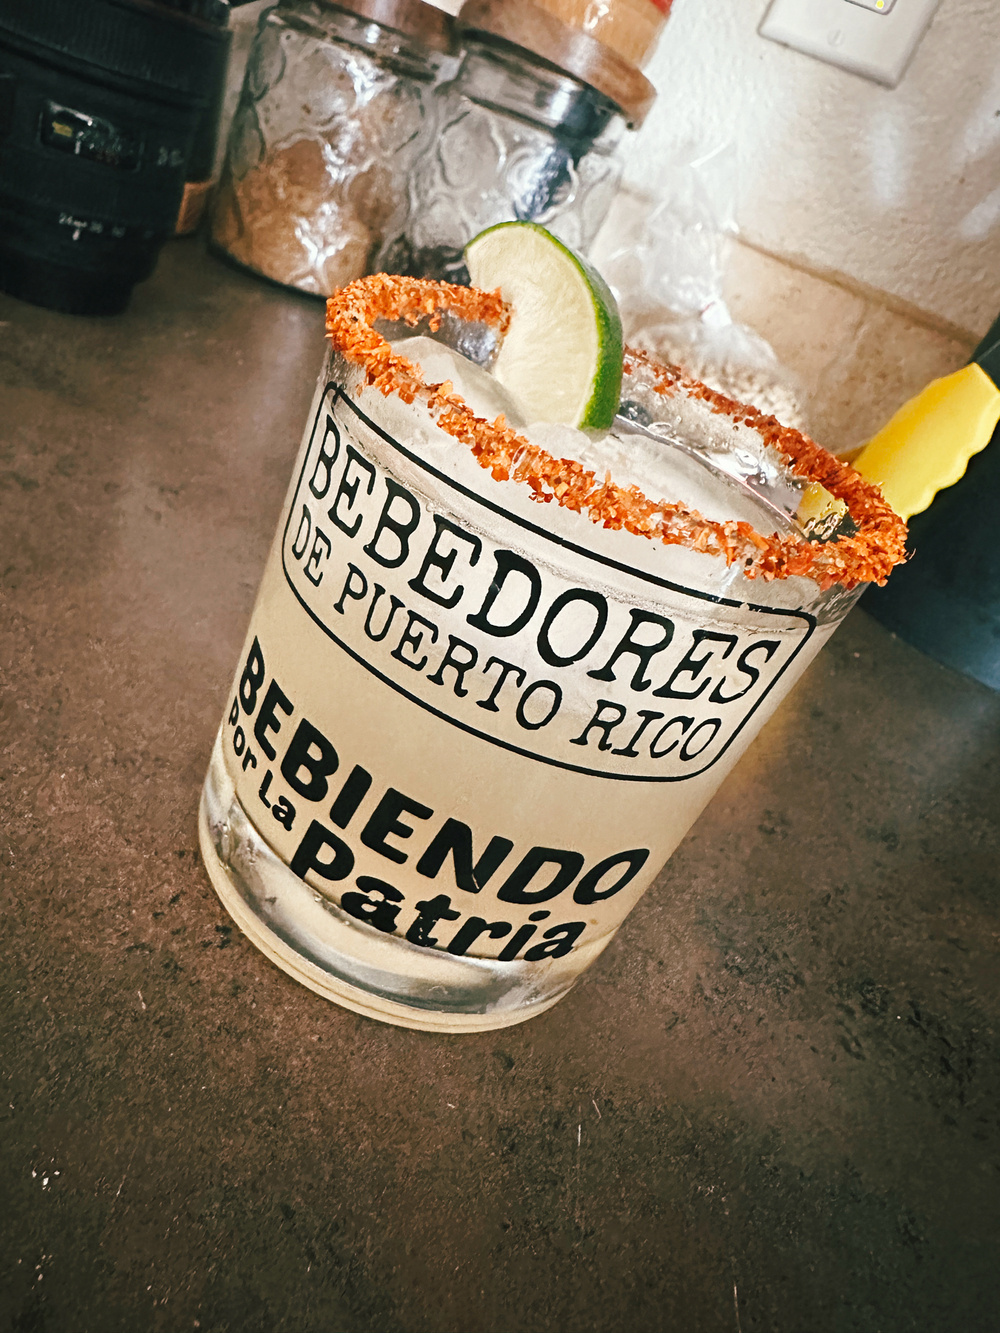 A cocktail in a glass with a chili-lime rim and a lime wedge garnish. The glass has text reading “BEBEDORES DE PUERTO RICO” and “BEBIENDO por La Patria.” 